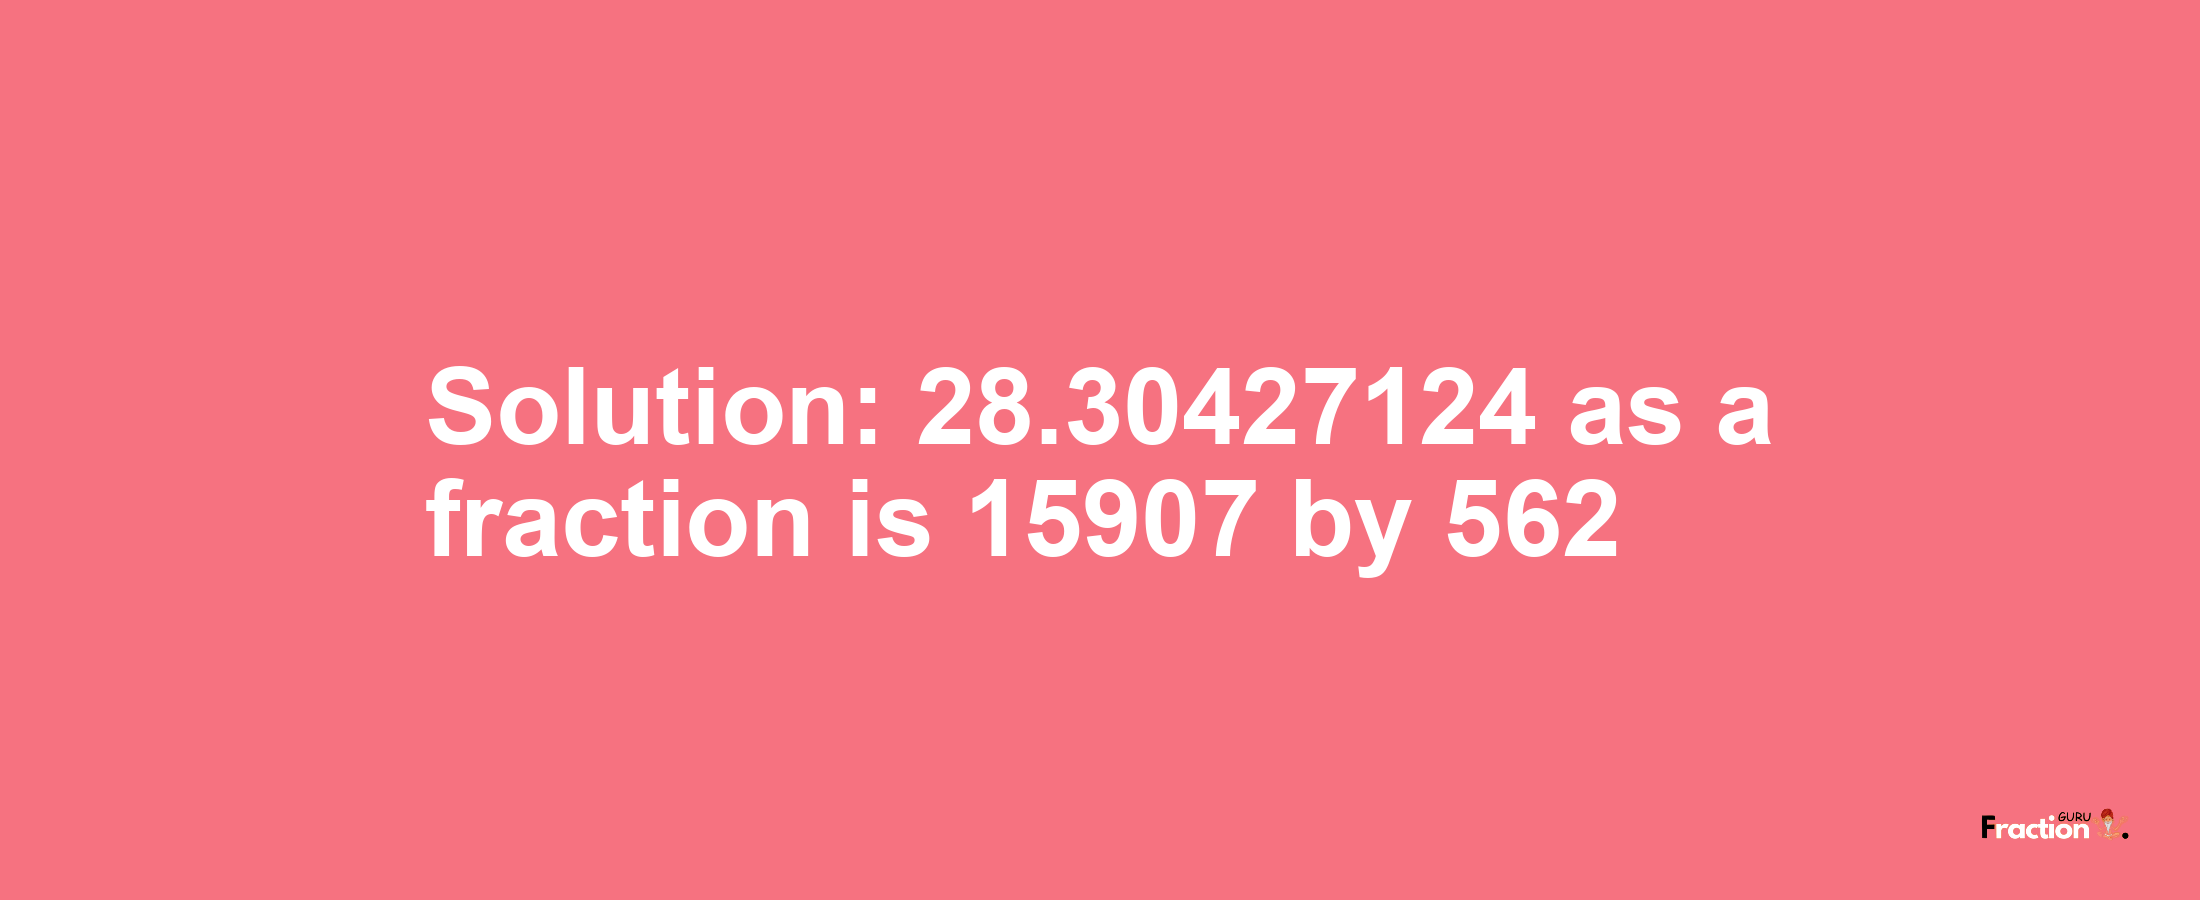 Solution:28.30427124 as a fraction is 15907/562